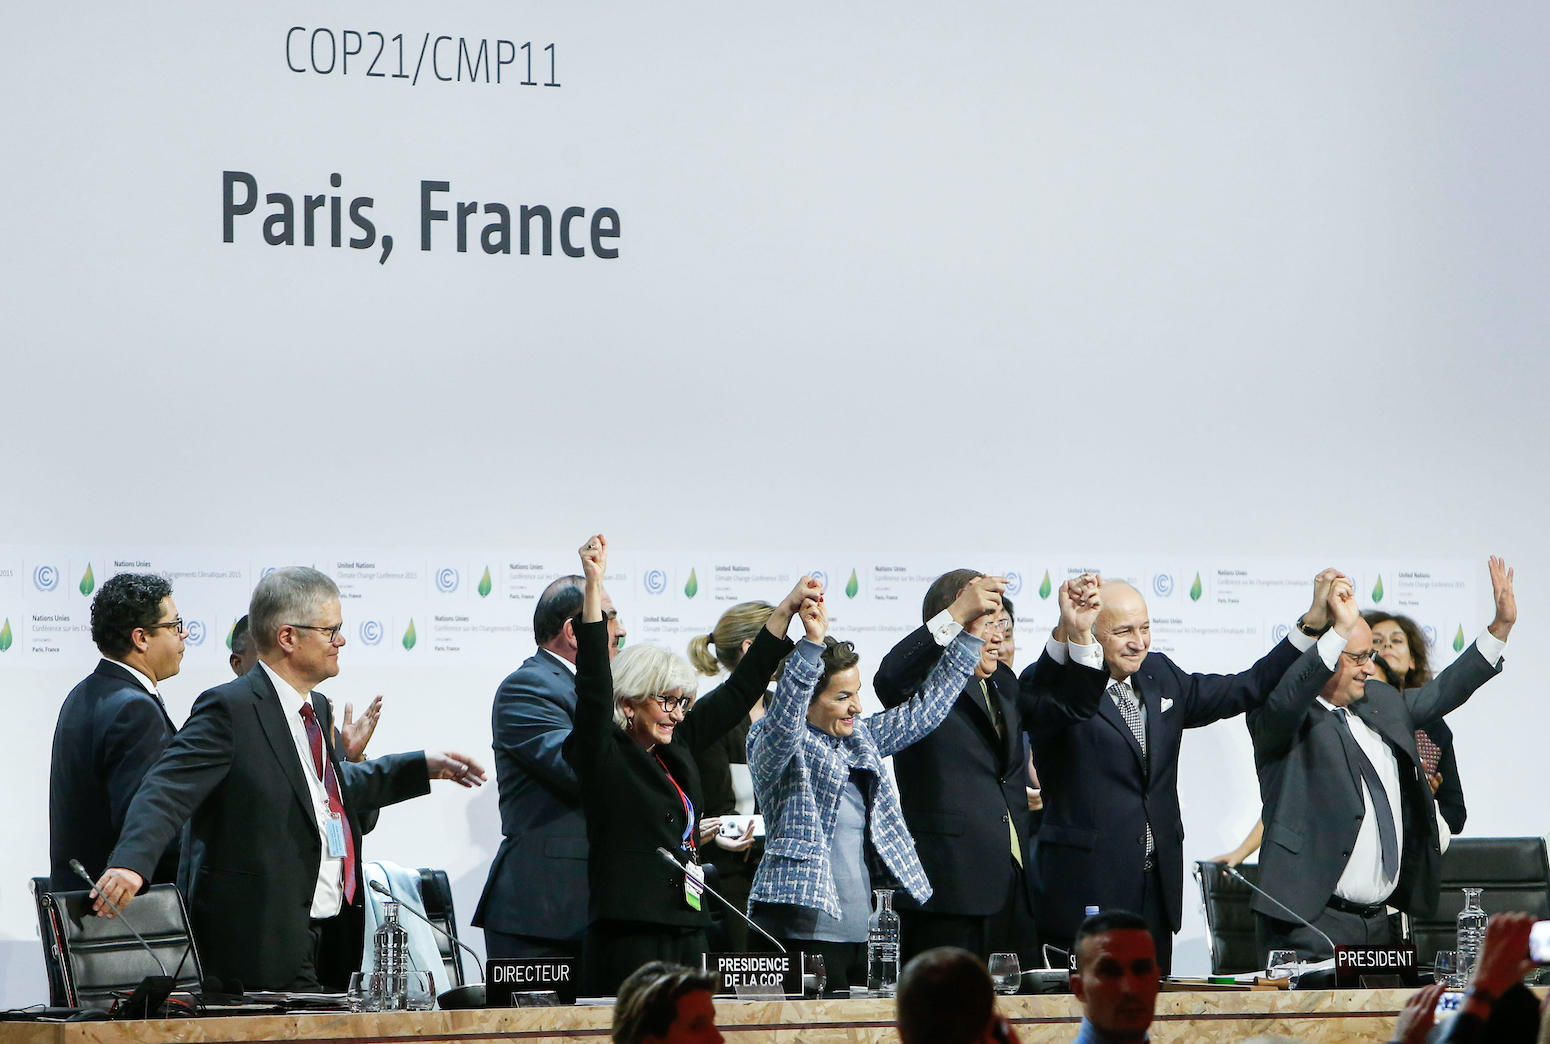 The historic Paris agreement on climate change is finally adopted at COP21 in Paris, France